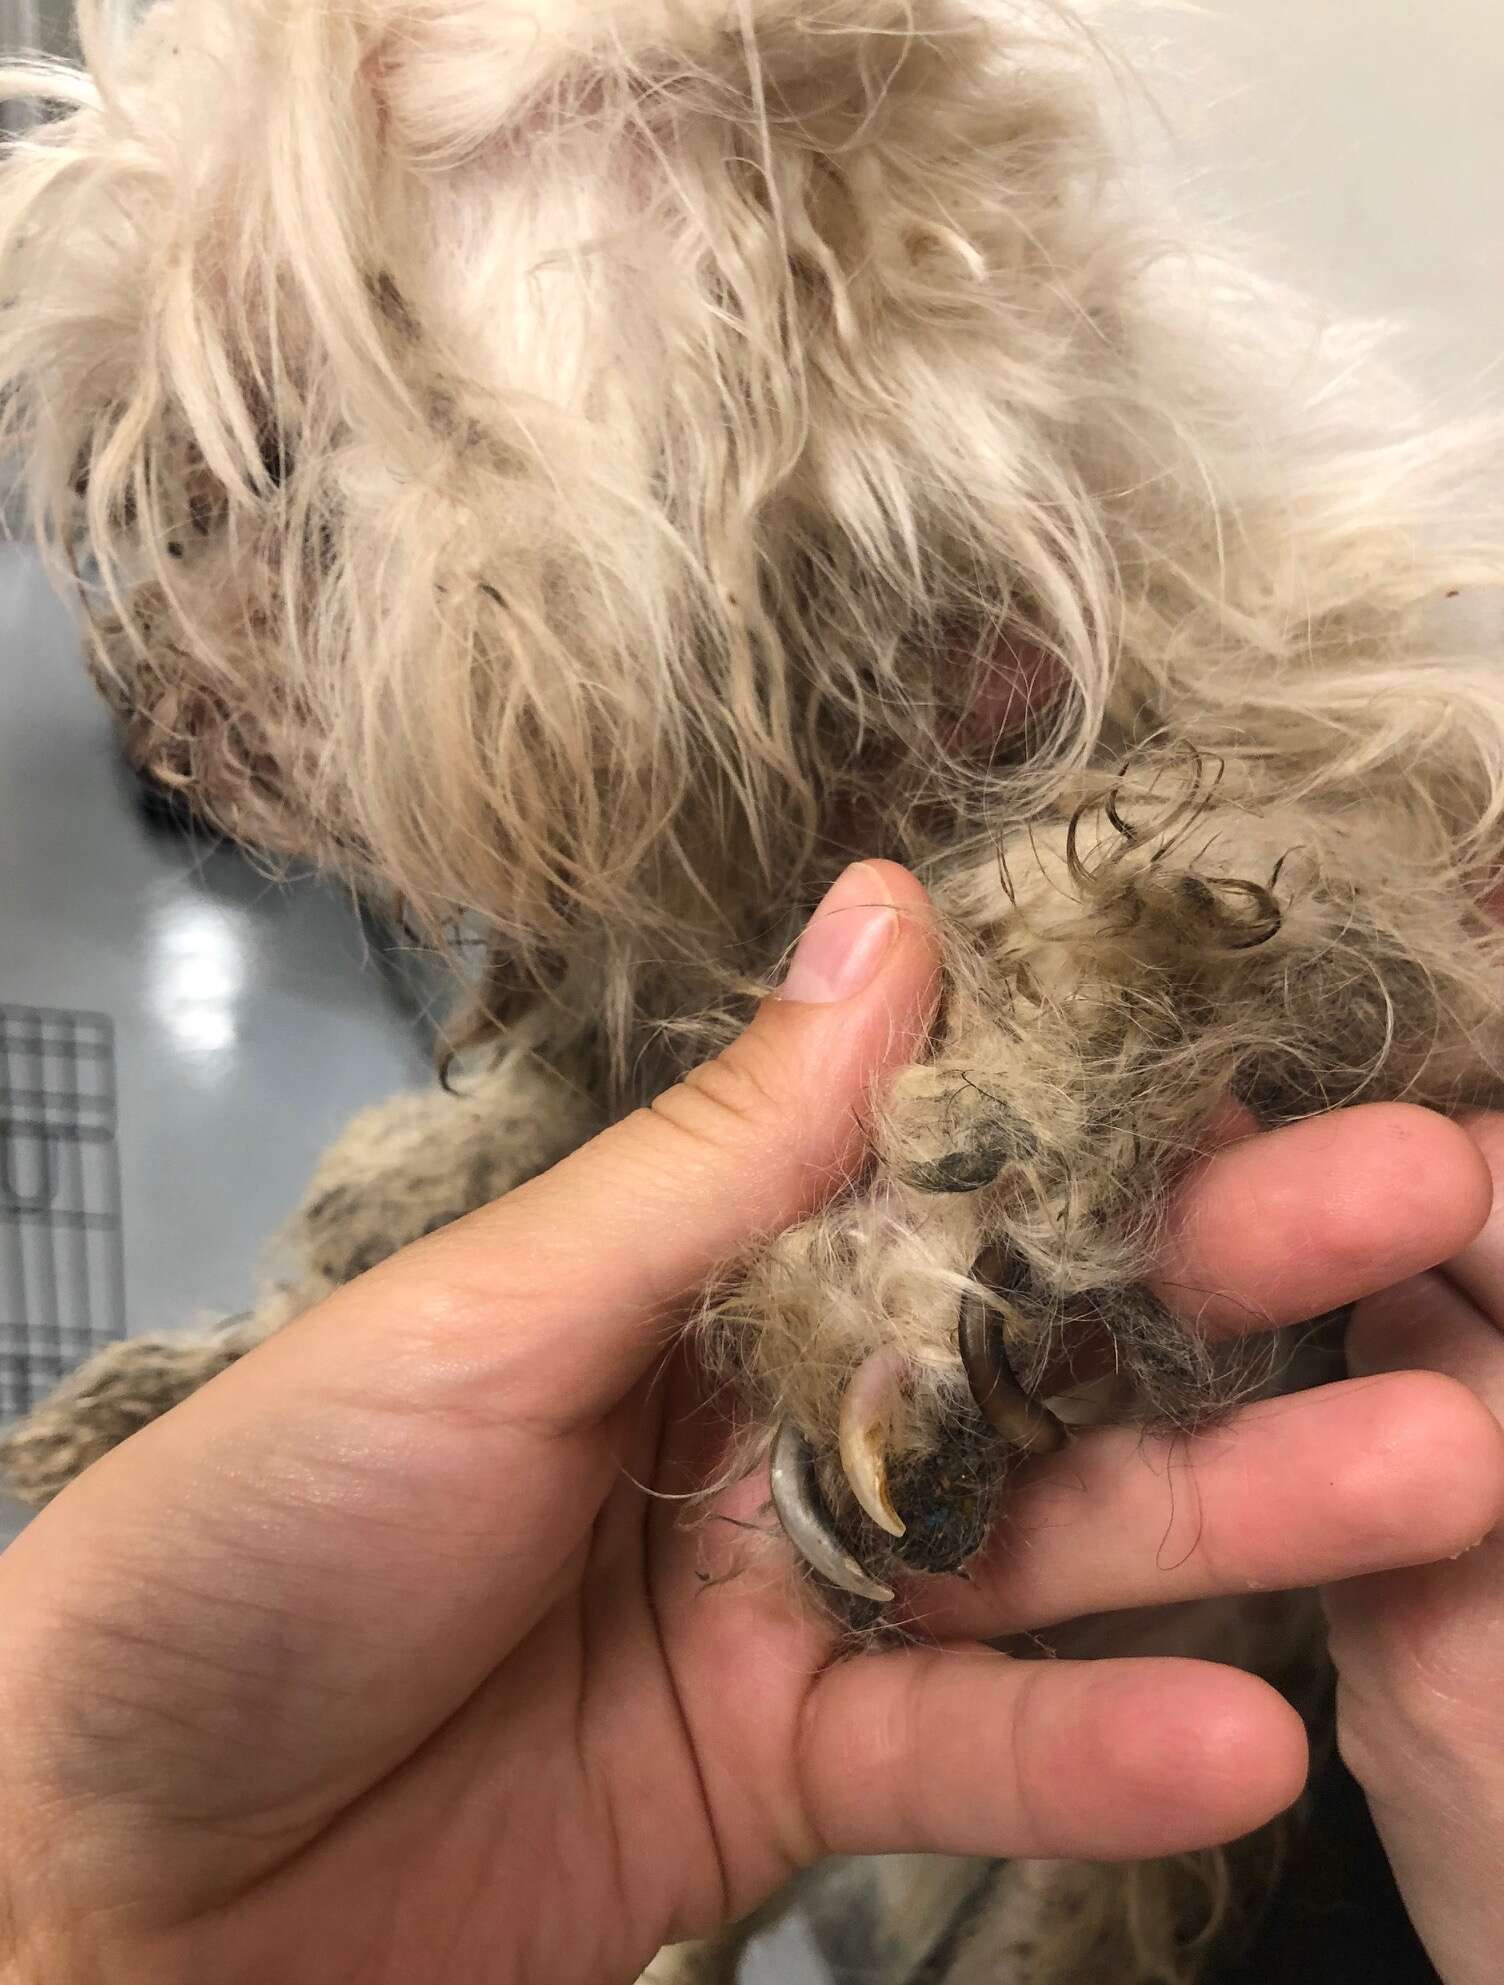 Astrid the matted dog's overgrown nails